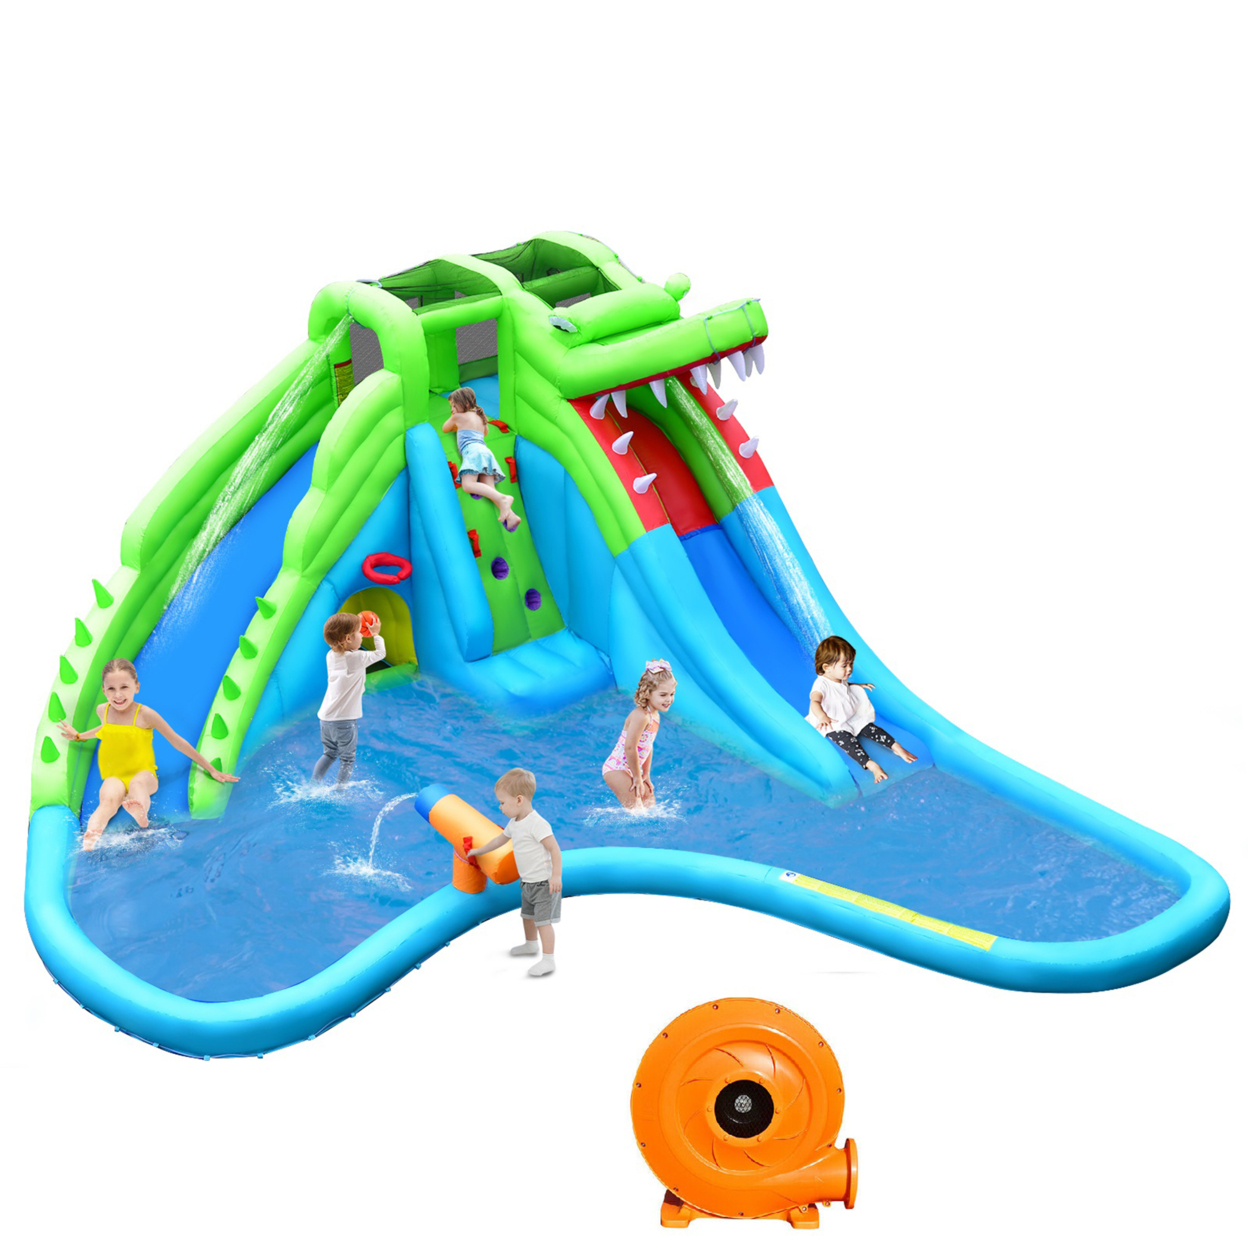 Crocodile Inflatable Water Slide Park Kids Bounce House W/ Dual Slides With 780W Blower